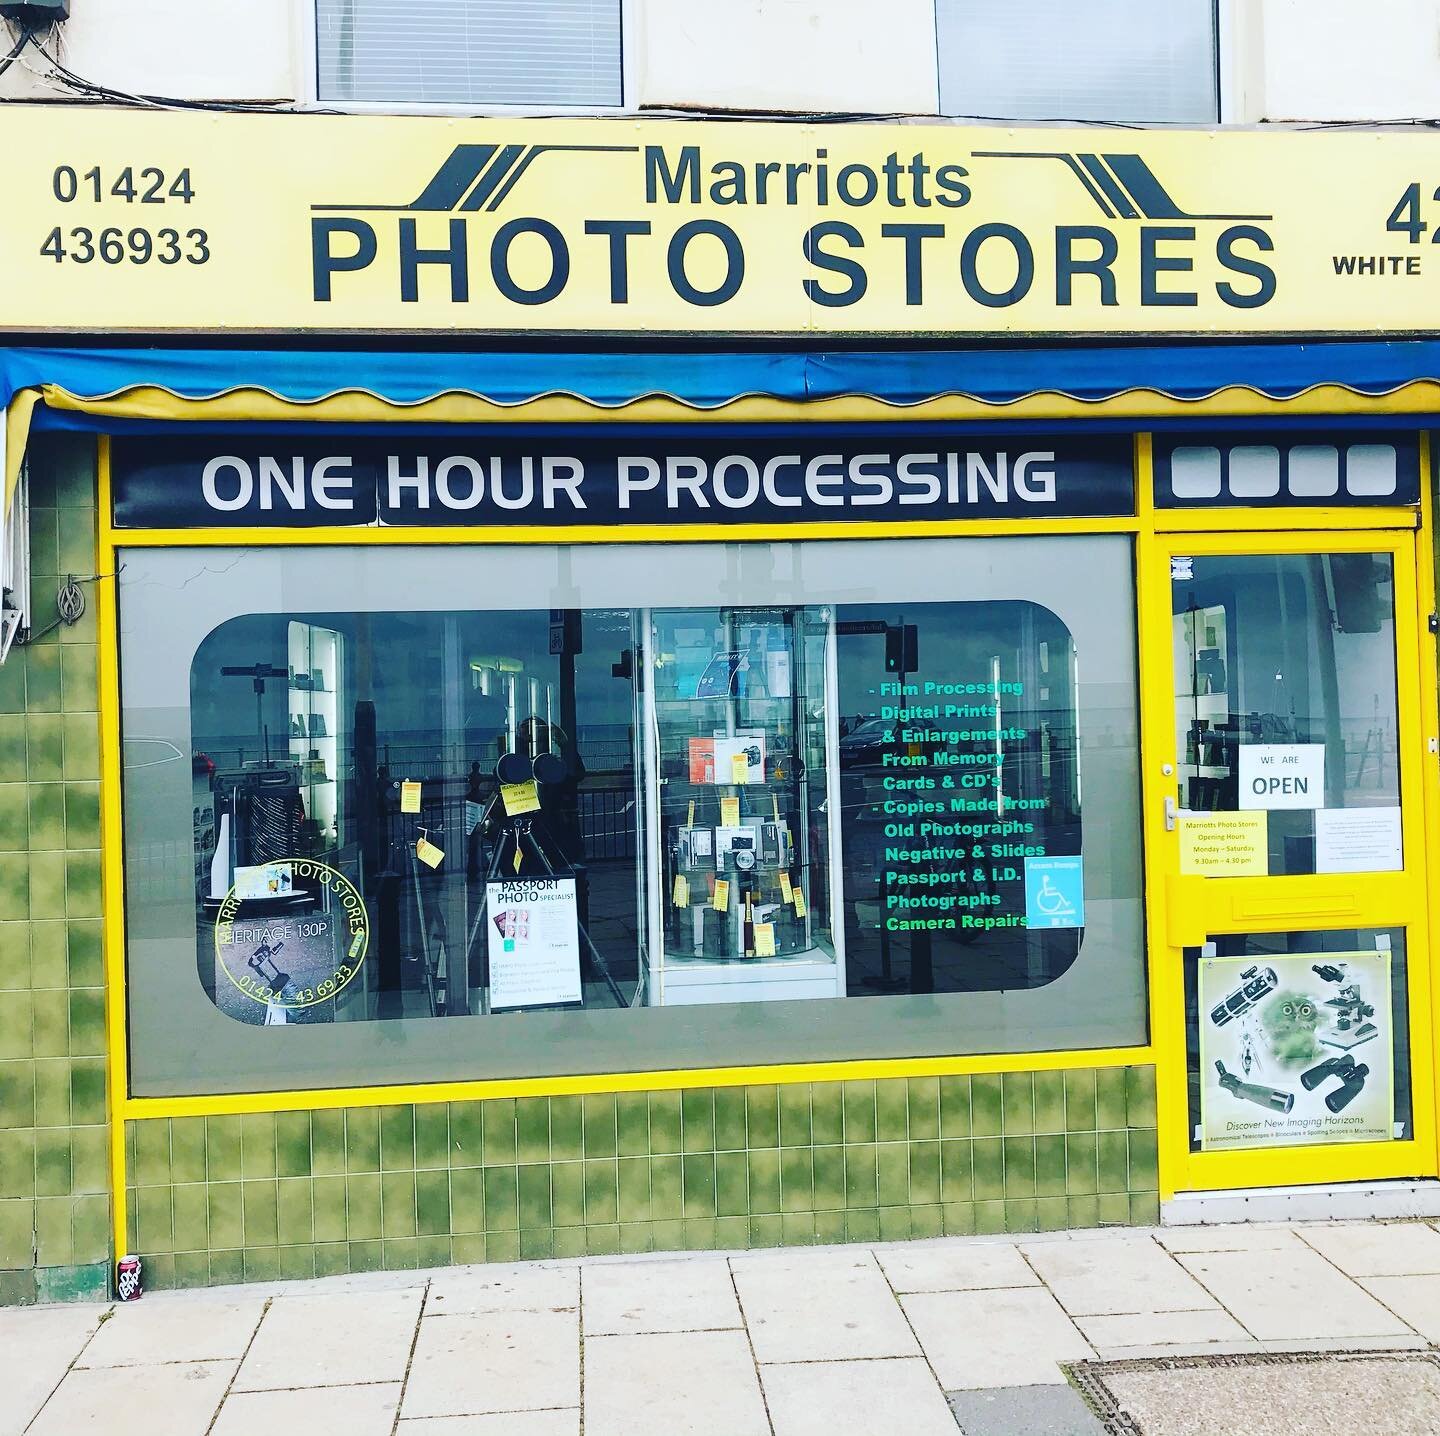 Excellent expertise from our local, independent, photographic supplier. A Hastings stalwart established in 1910! #ShopLocal and #LoveWhereYouLive